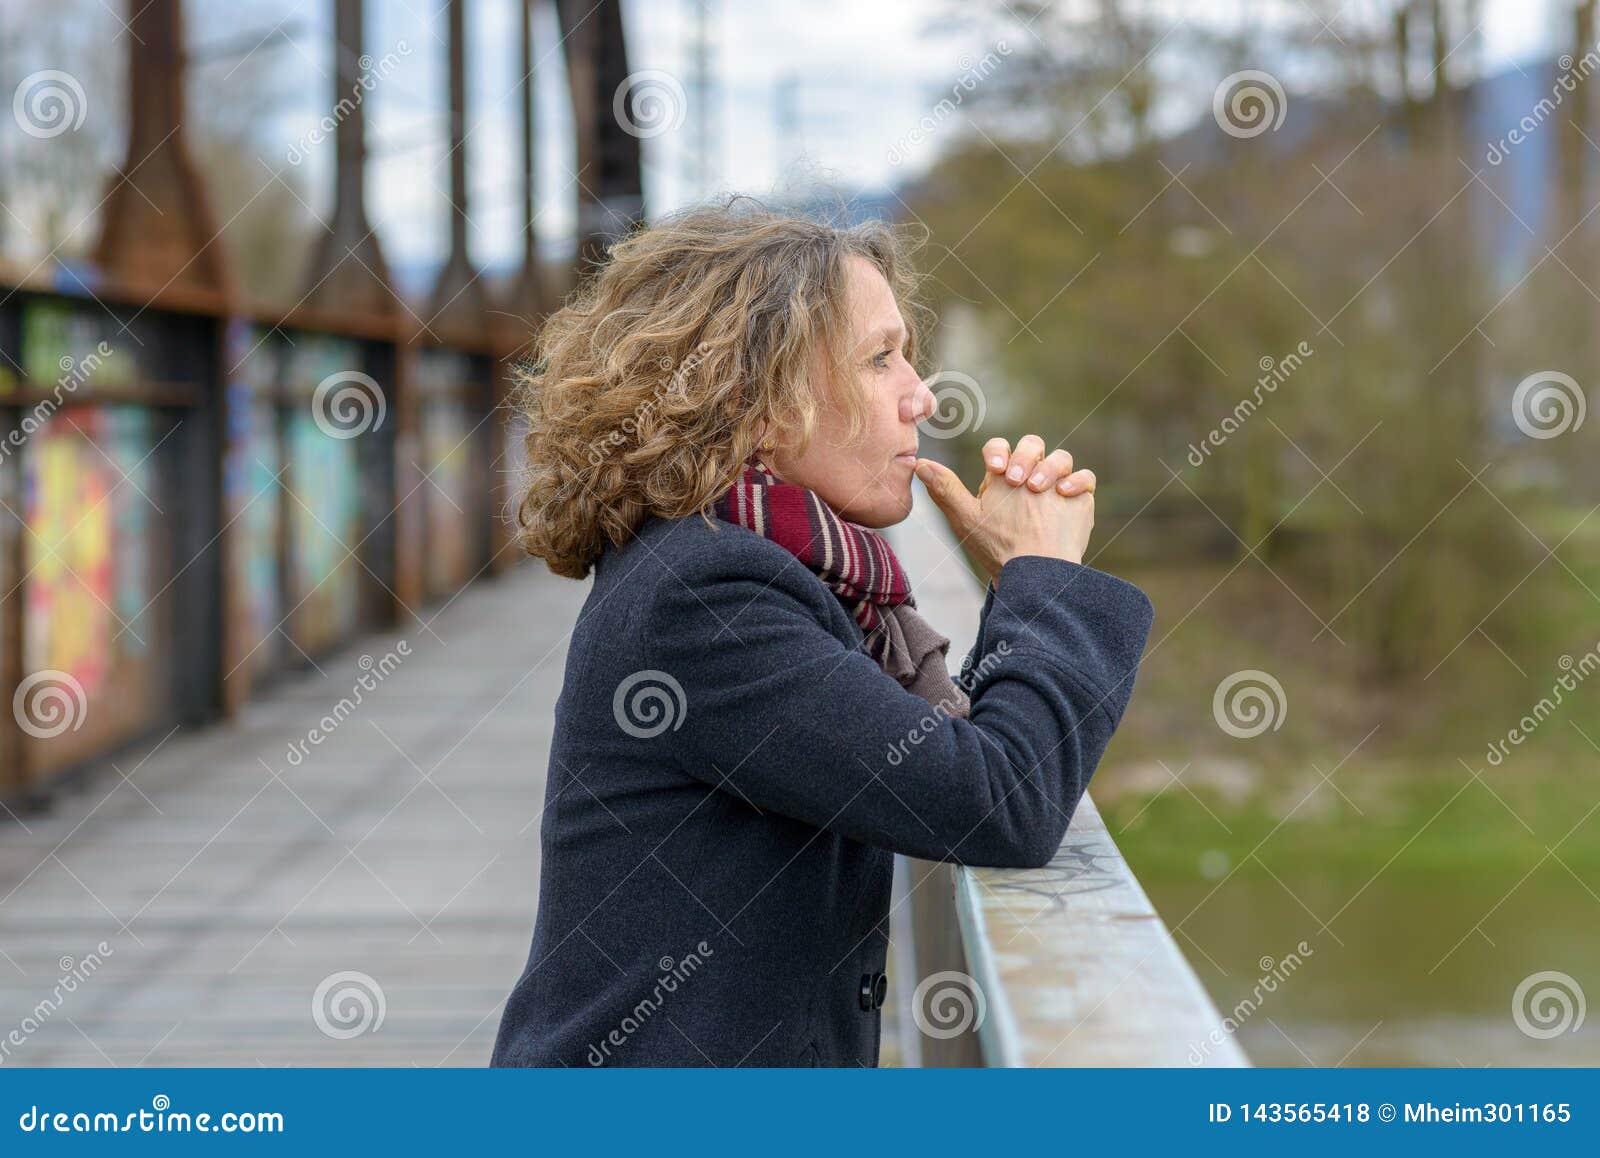 thoughtful woman gazing out from a bridge